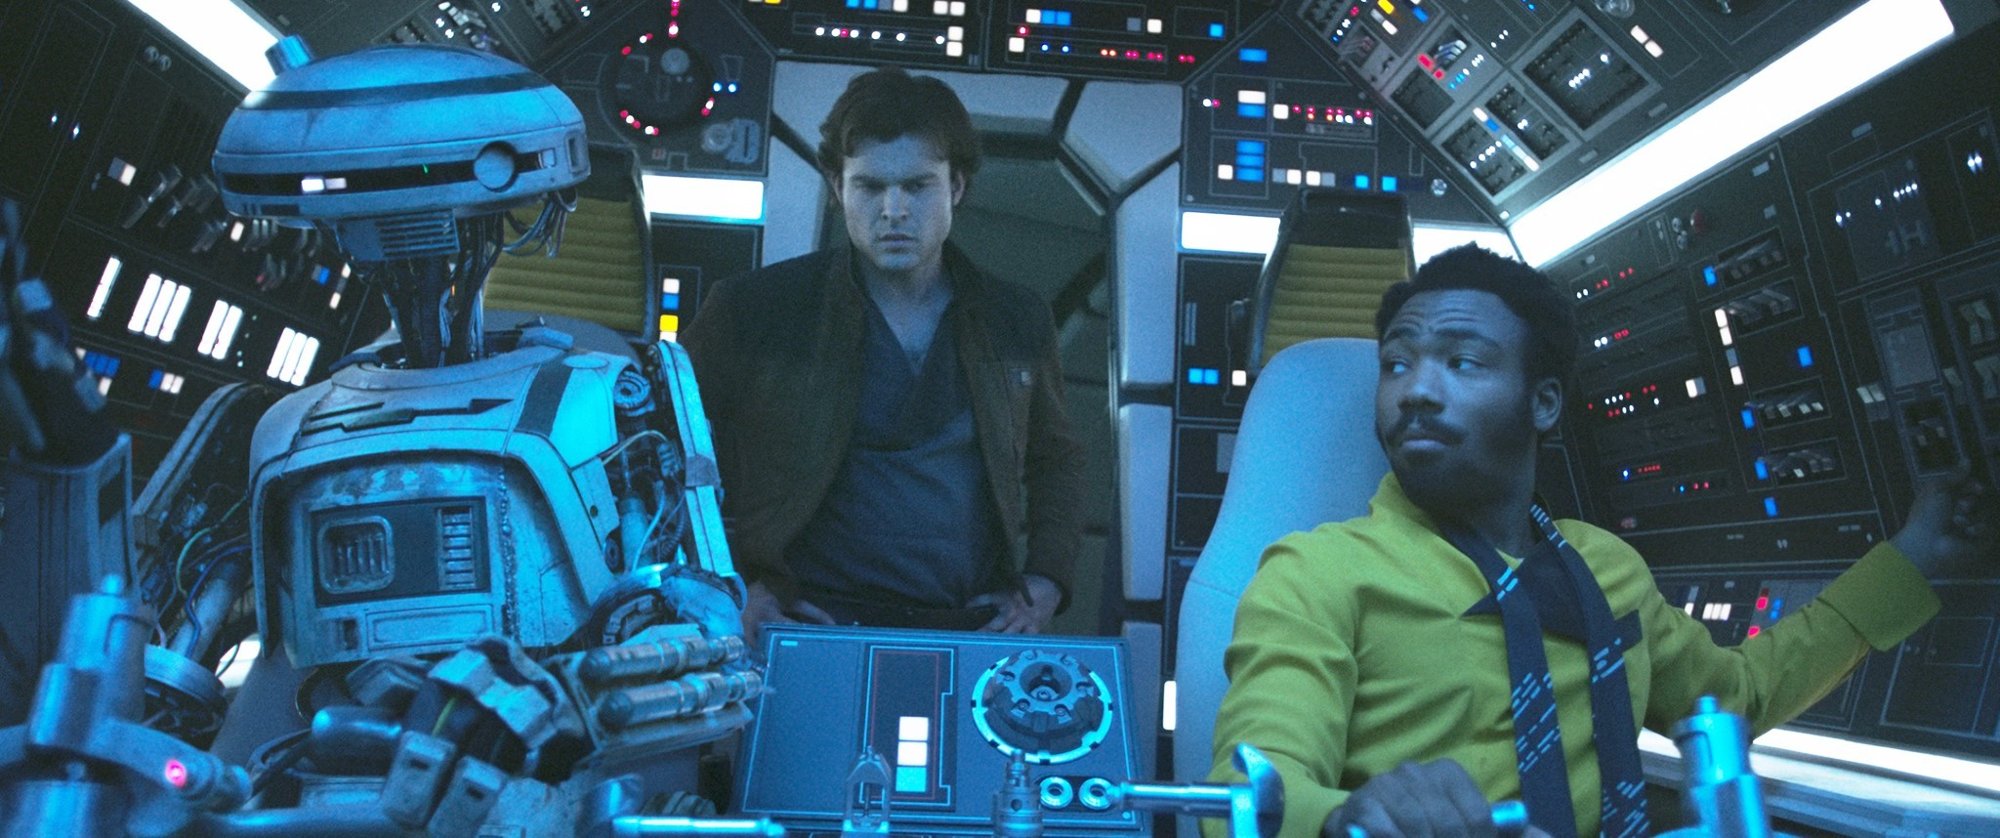 L3-37, Han Solo (Alden Ehrenreich) and Lando Calrissian (Donald Glover) from Walt Disney Pictures' Solo: A Star Wars Story (2018)